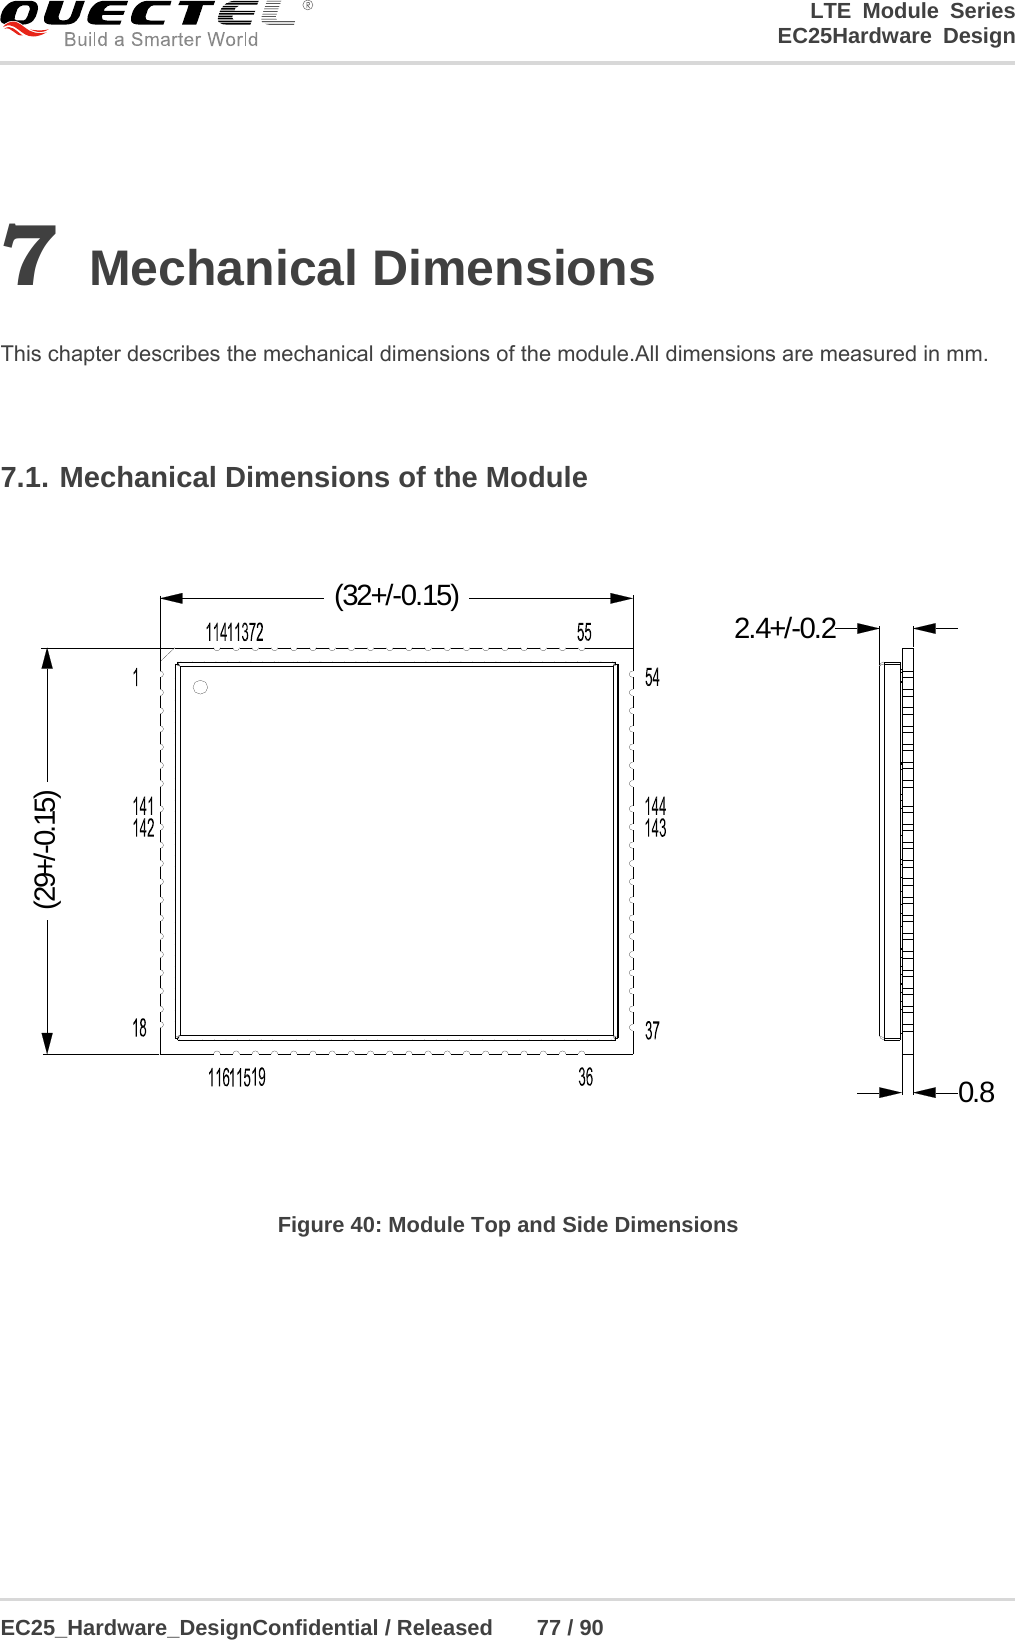 LTE Module Series                                                  EC25Hardware Design  EC25_Hardware_DesignConfidential / Released    77 / 90    7 Mechanical Dimensions  This chapter describes the mechanical dimensions of the module.All dimensions are measured in mm.  7.1. Mechanical Dimensions of the Module (32+/-0.15)(29+/-0.15)0.82.4+/-0.2 Figure 40: Module Top and Side Dimensions  